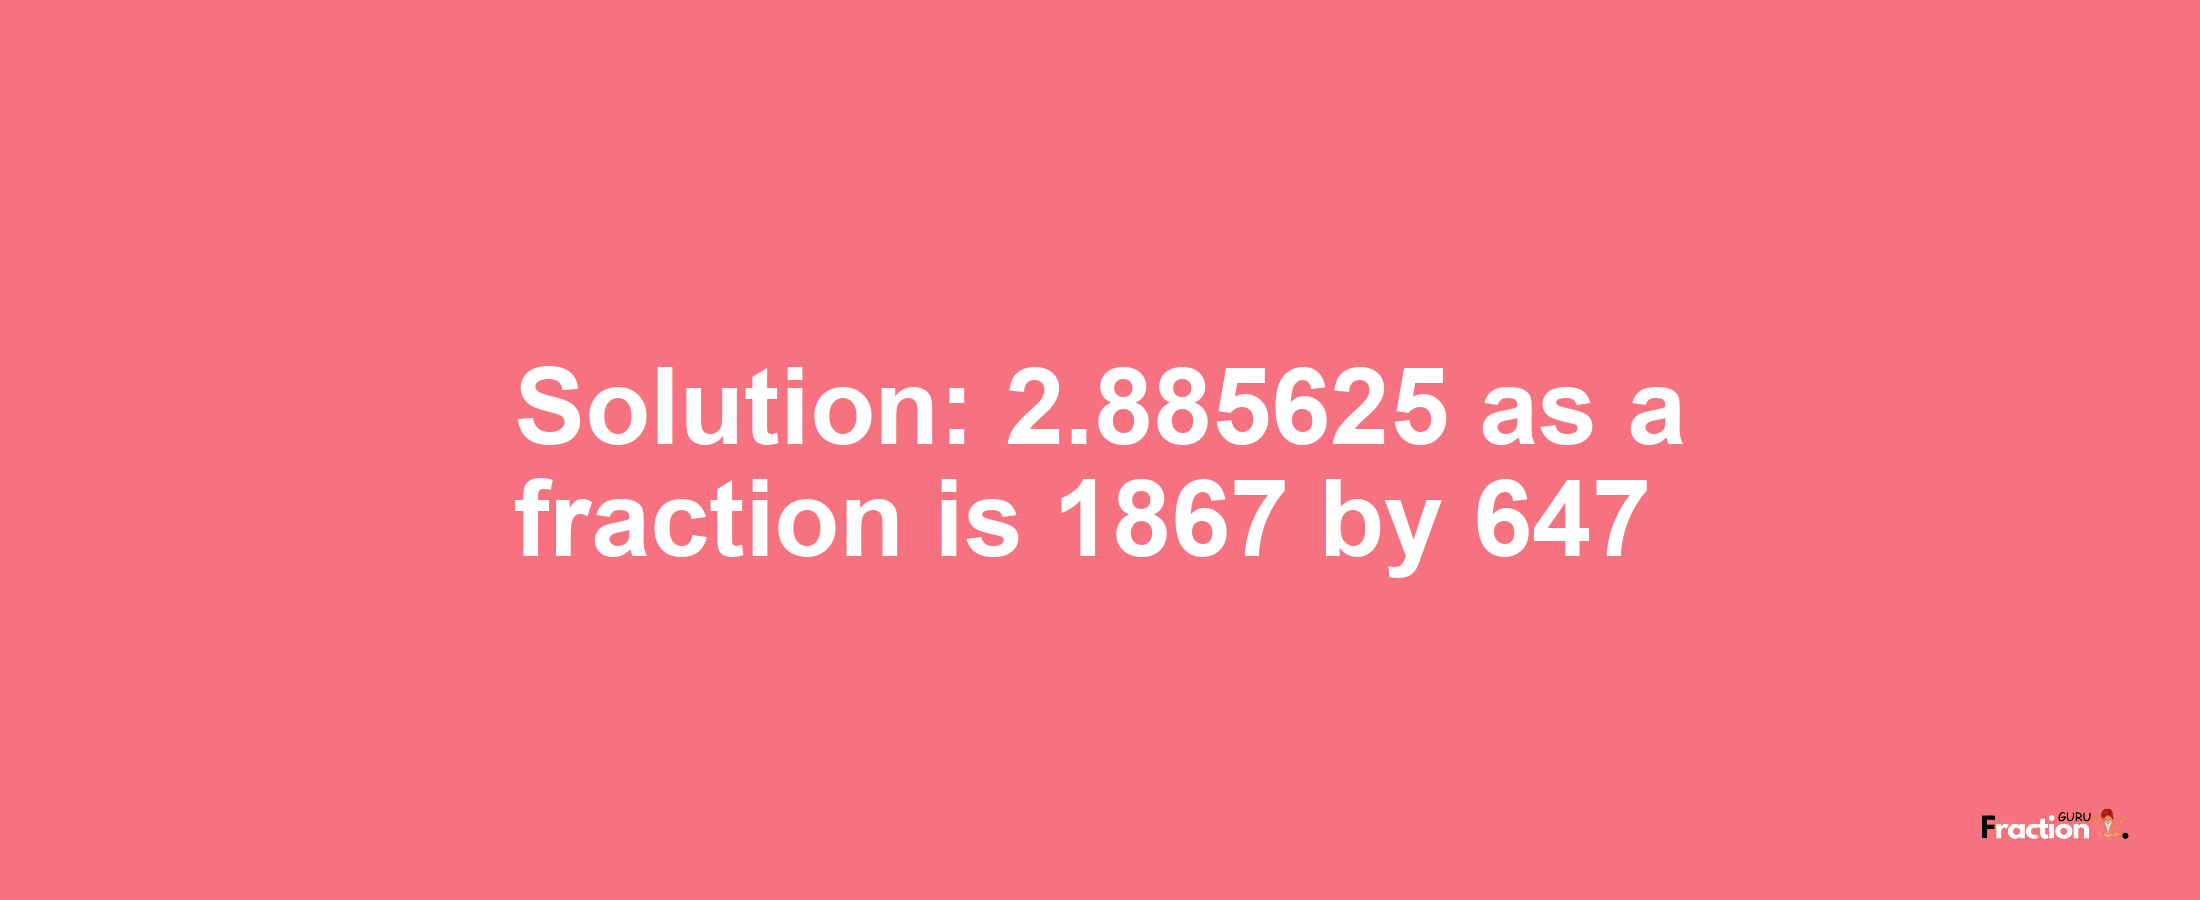 Solution:2.885625 as a fraction is 1867/647